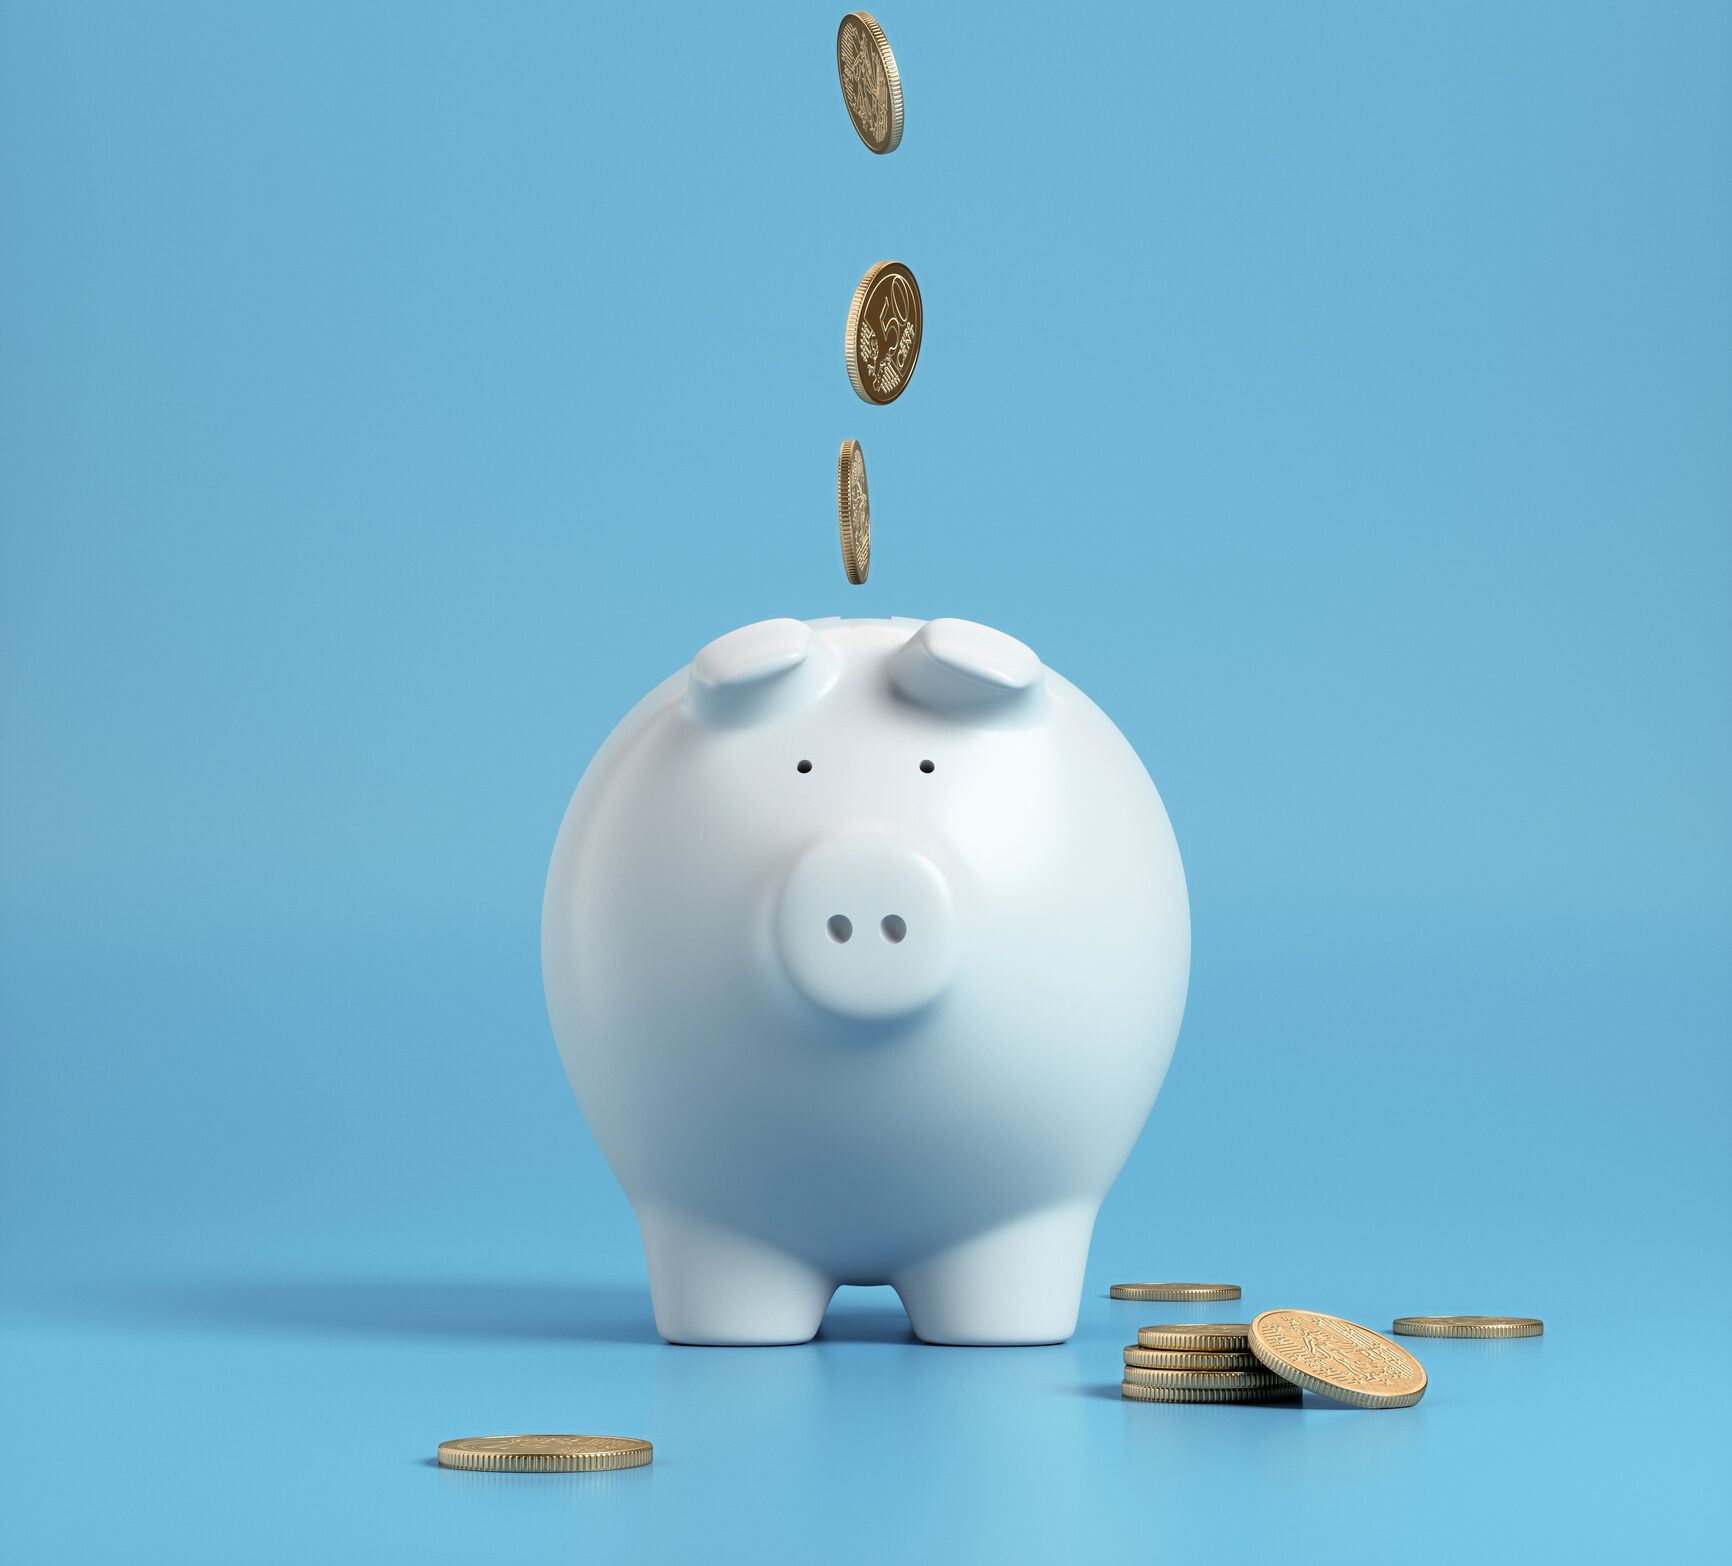 Falling coins in to a white piggy bank, Finance concepts